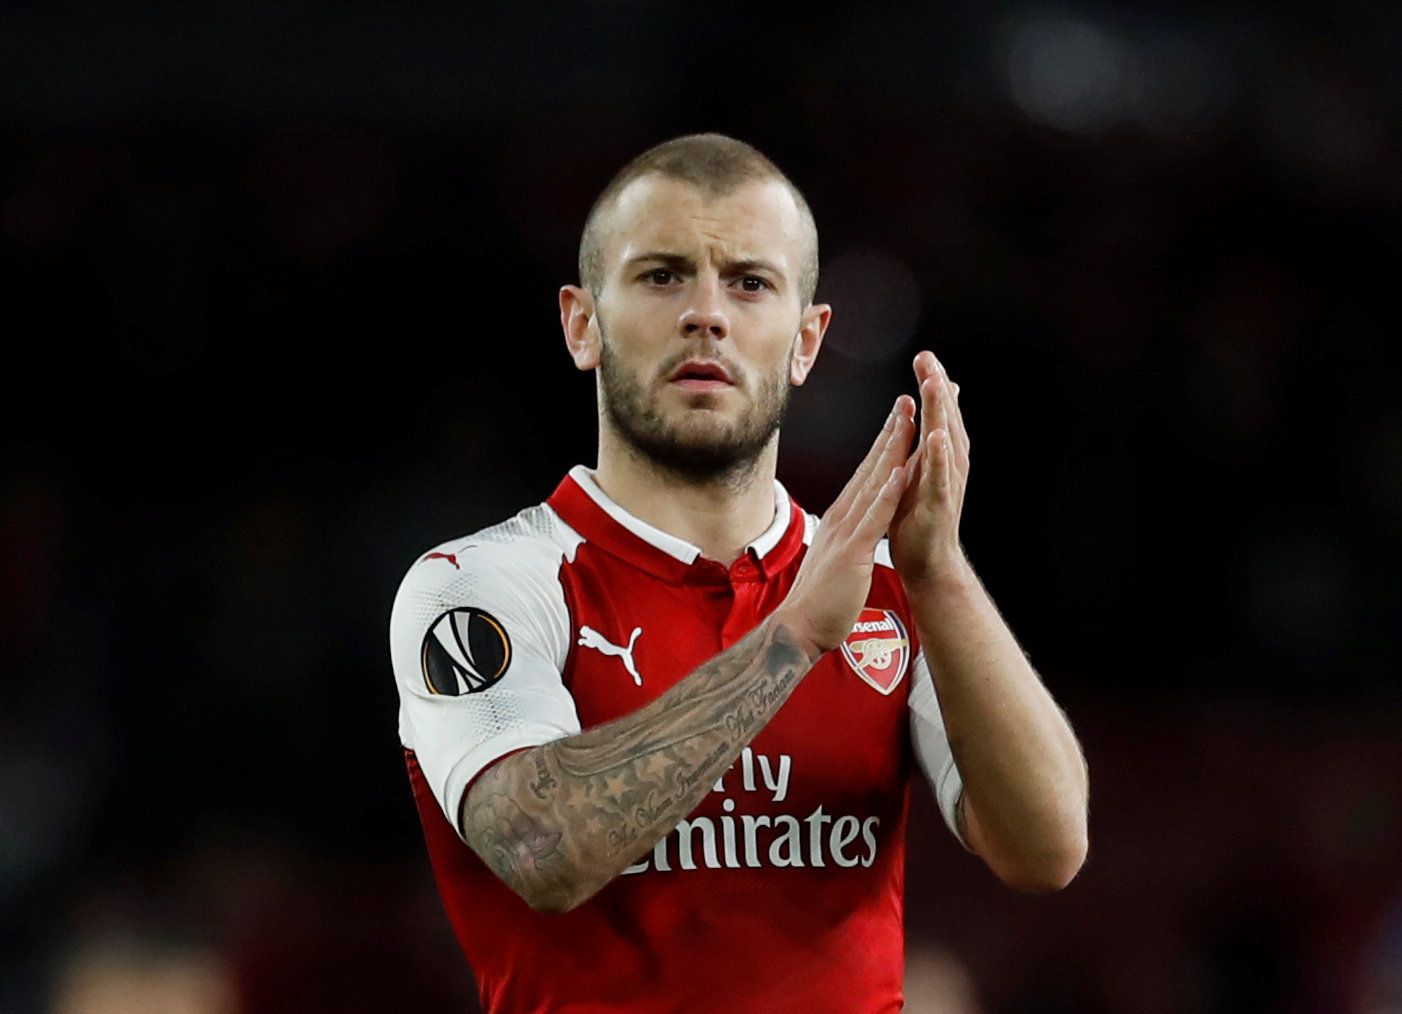 Soccer Football - Europa League Semi Final First Leg - Arsenal vs Atletico Madrid - Emirates Stadium, London, Britain - April 26, 2018   Arsenal's Jack Wilshere applauds the fans at the end of the match    Action Images via Reuters/Andrew Couldridge